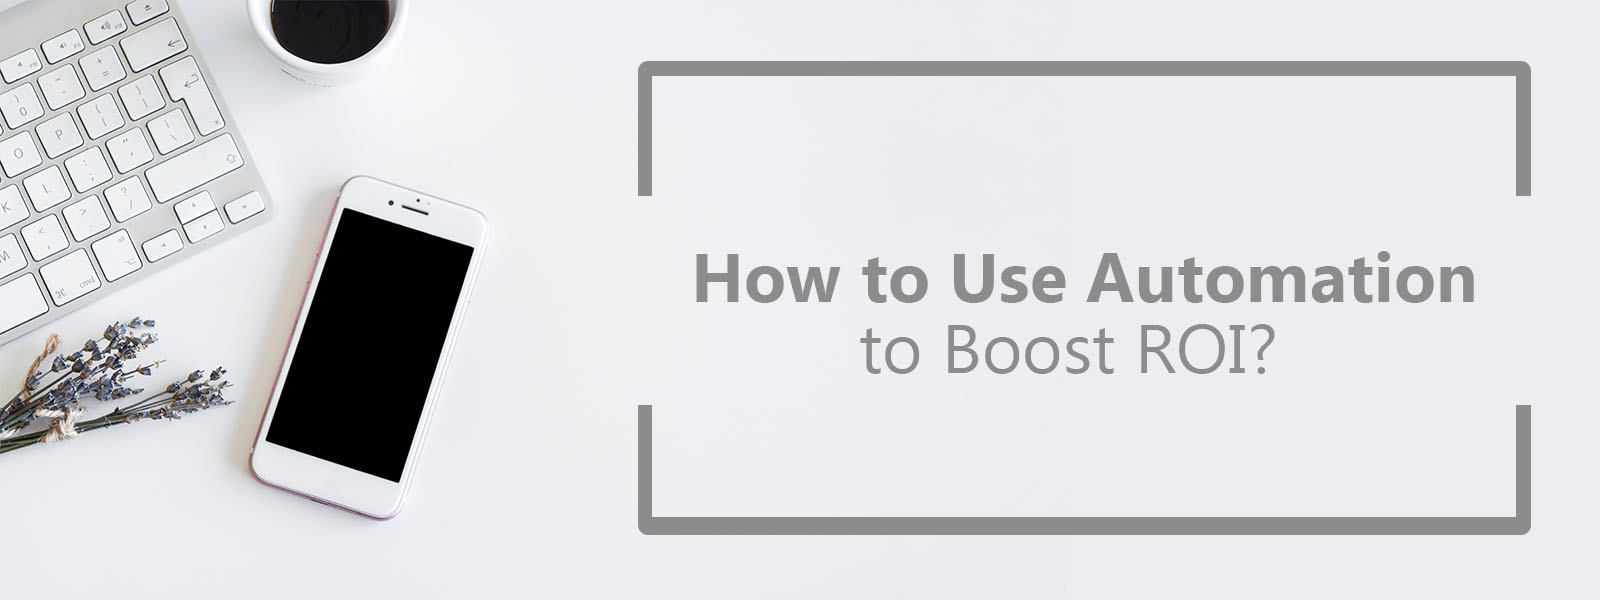 how to use automation to boost roi